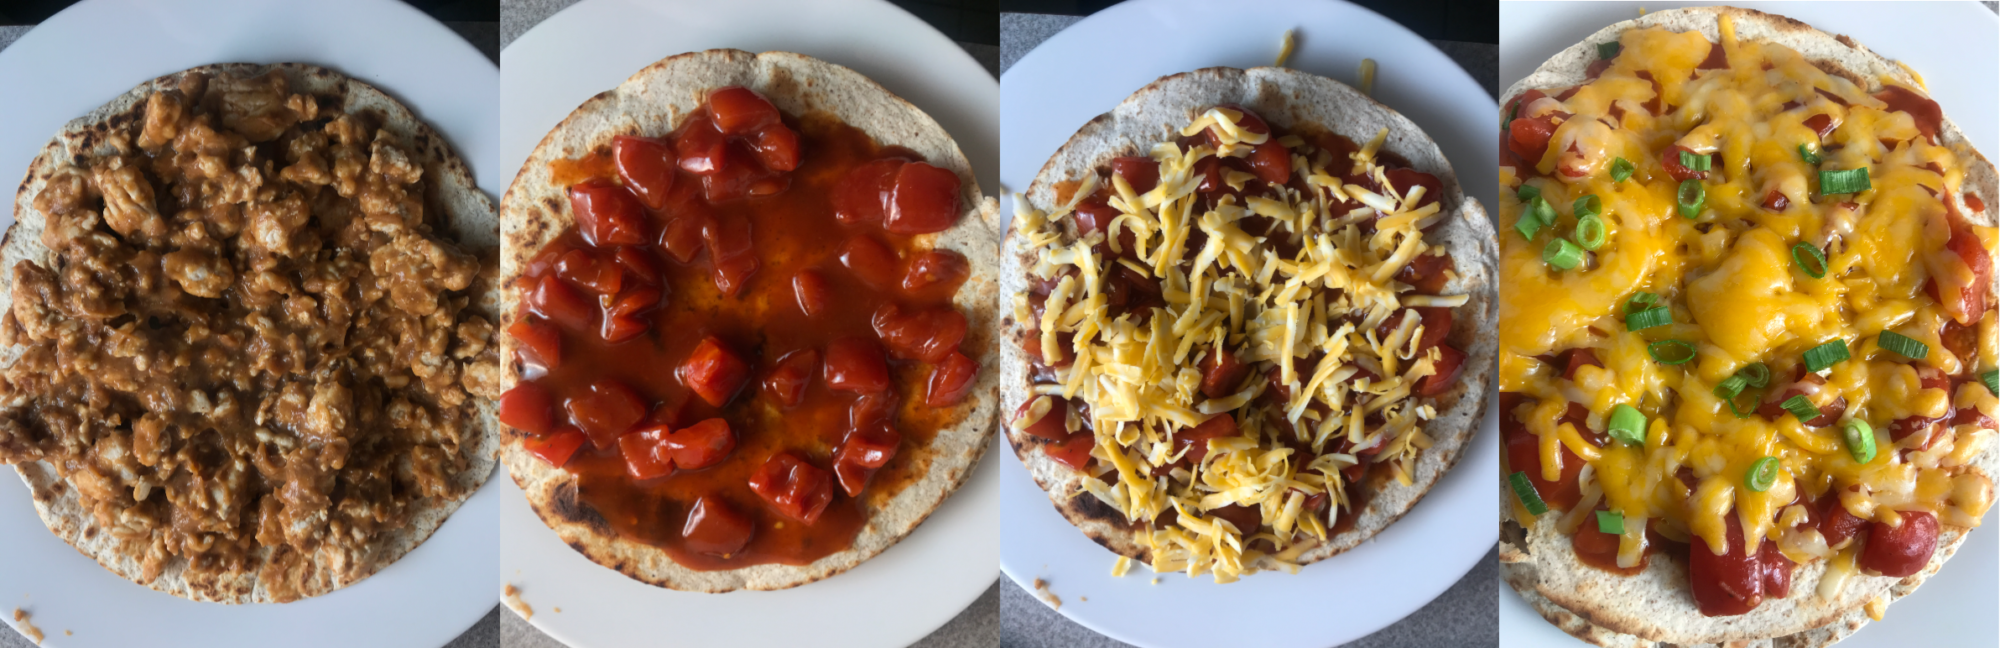 How to make perfect Mexican Pizzas like the ones you get at Taco Bell. 